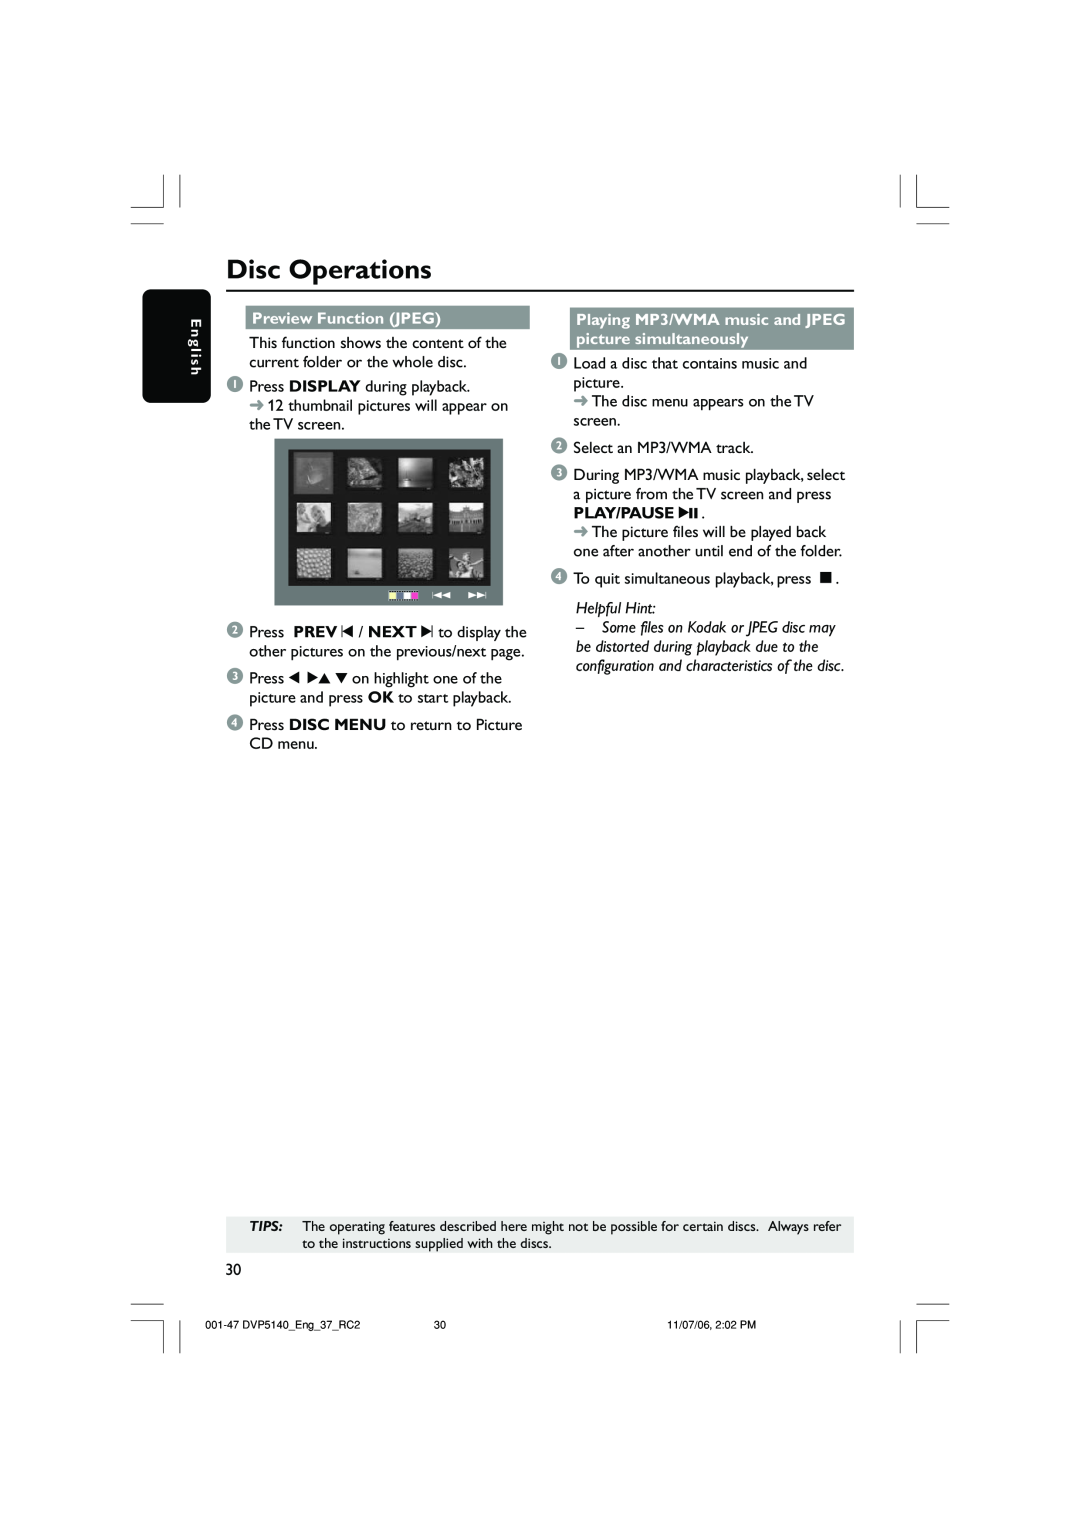 Philips DVP5140 user manual Disc Operations, Preview Function JPEG, Playing MP3/WMA music and JPEG picture simultaneously 